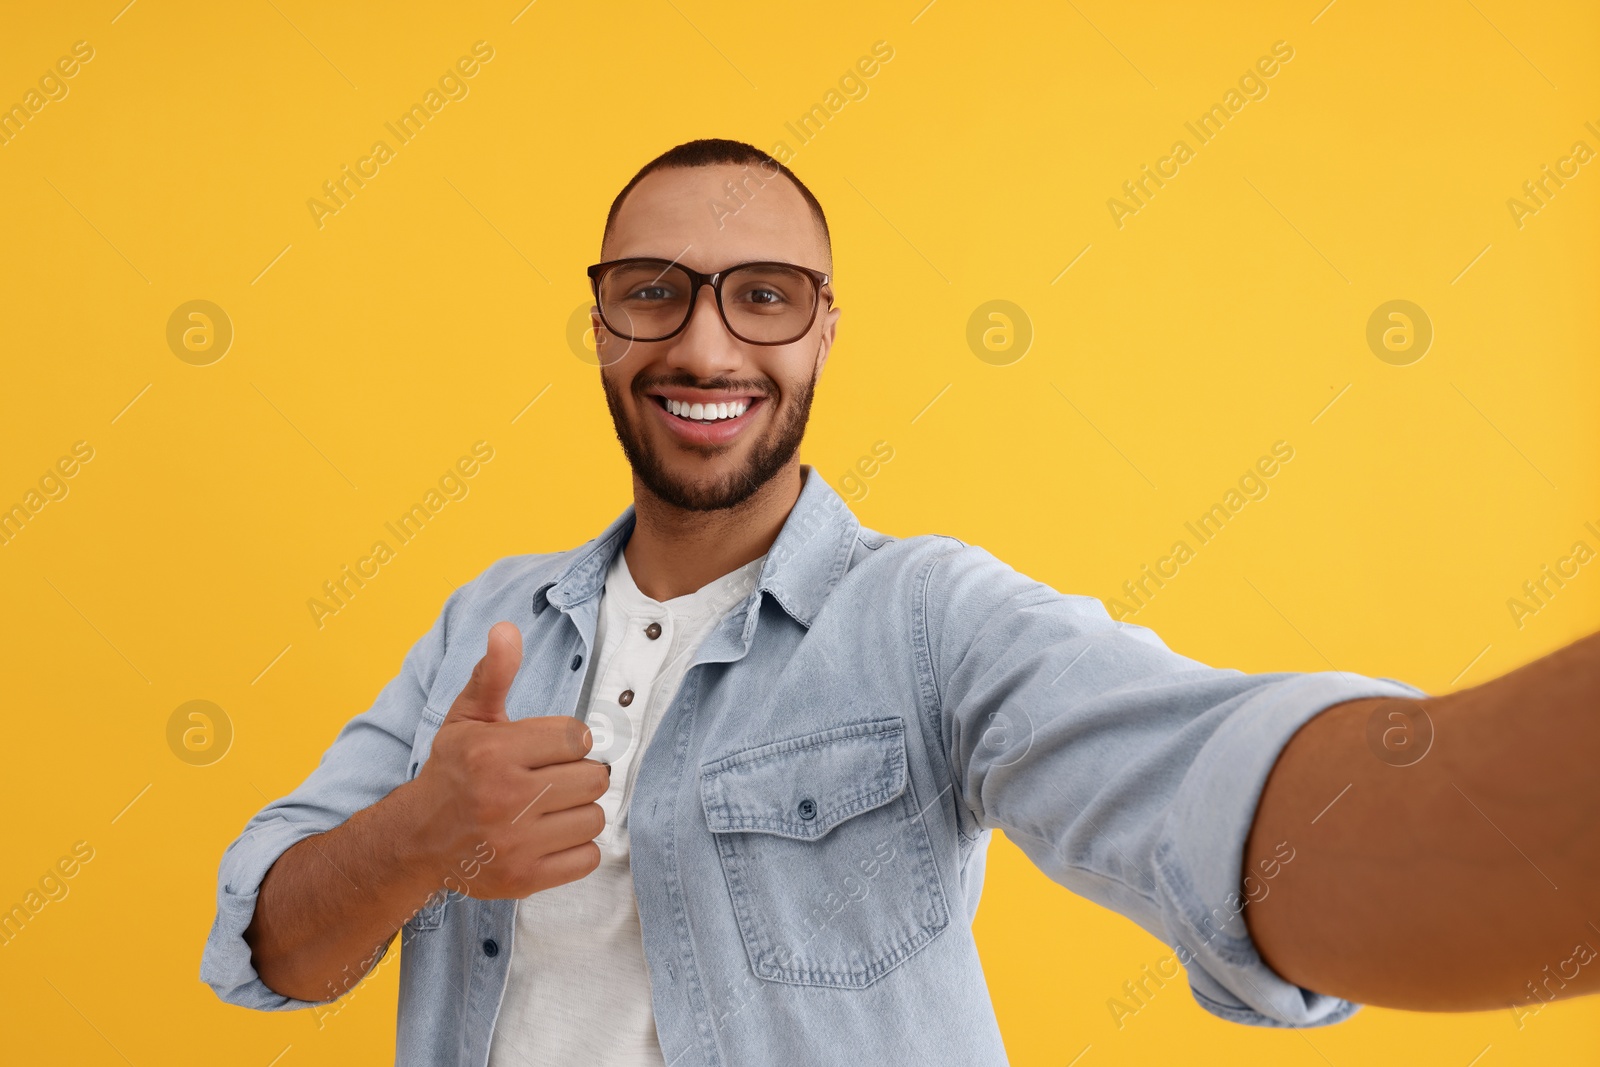 Photo of Smiling young man taking selfie and showing thumbs up on yellow background